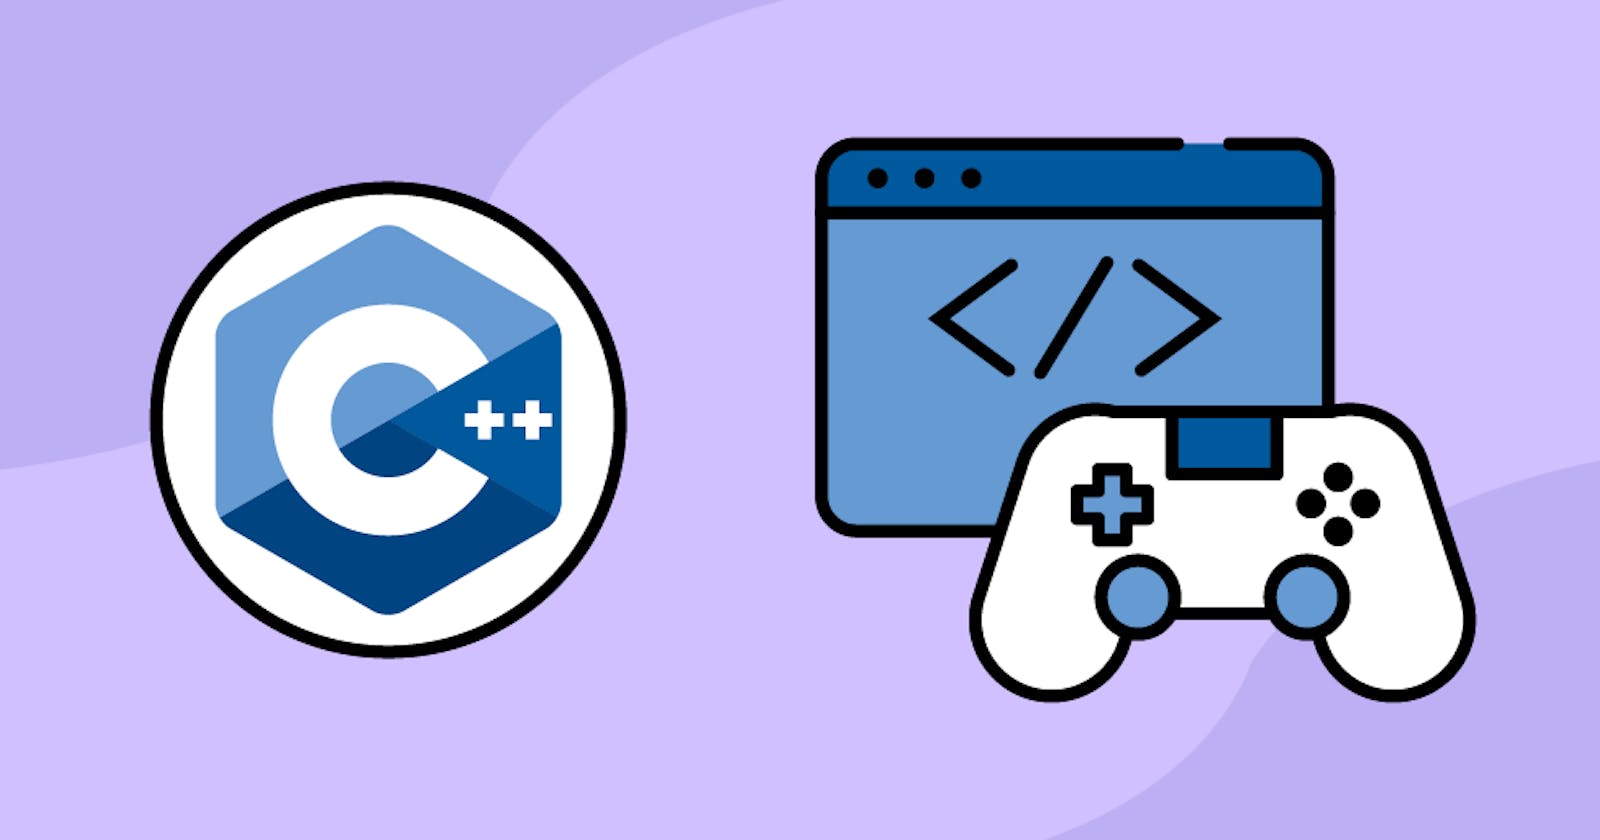 Why you should learn C++ for game development